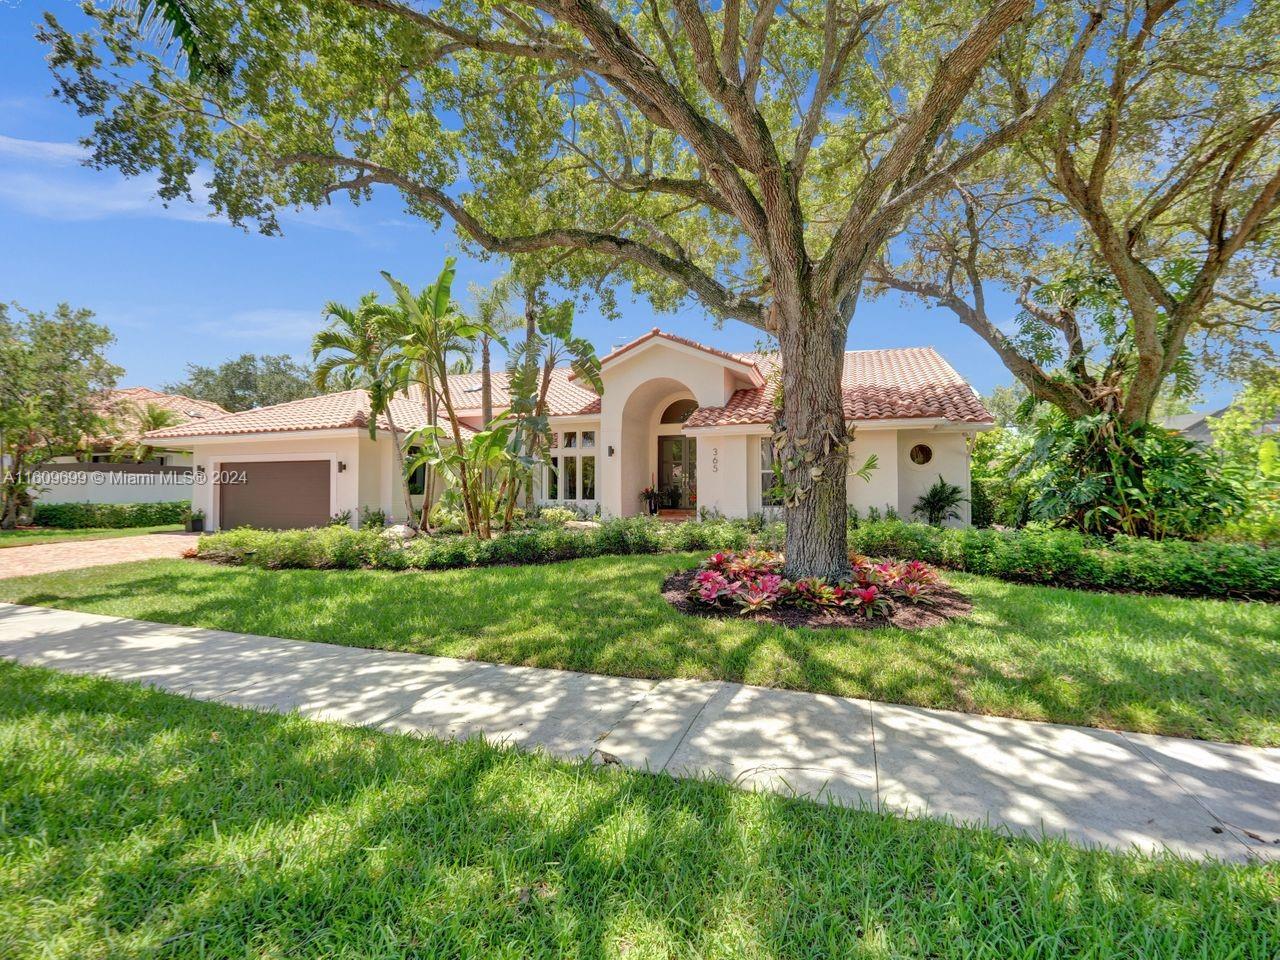 This is your Dream Home! Located in exclusive Palm Island, one of Weston's most desirable communities, this pristine home has timeless charm & a beautiful open floor plan w/5 Bedrooms & 3 1/2 baths. Features include brand new impact windows & doors, handcrafted built-ins, family room & living room w/double-sided fireplace, oversized chef's kitchen w/Sub-Zero appliances, Thermador gas stove, built-in Miele coffee/espresso system, new bathrooms w/European fixtures, endless gas hot water, primary bedroom w/sitting area & luxurious bath. The spacious outdoor covered living area has an oversized pool, large backyard, lush landscaping & piped gas grill. Gated community w/front/rear gates & neighborhood park, walking distance to ball fields, schools, places of worship, shopping & dining!